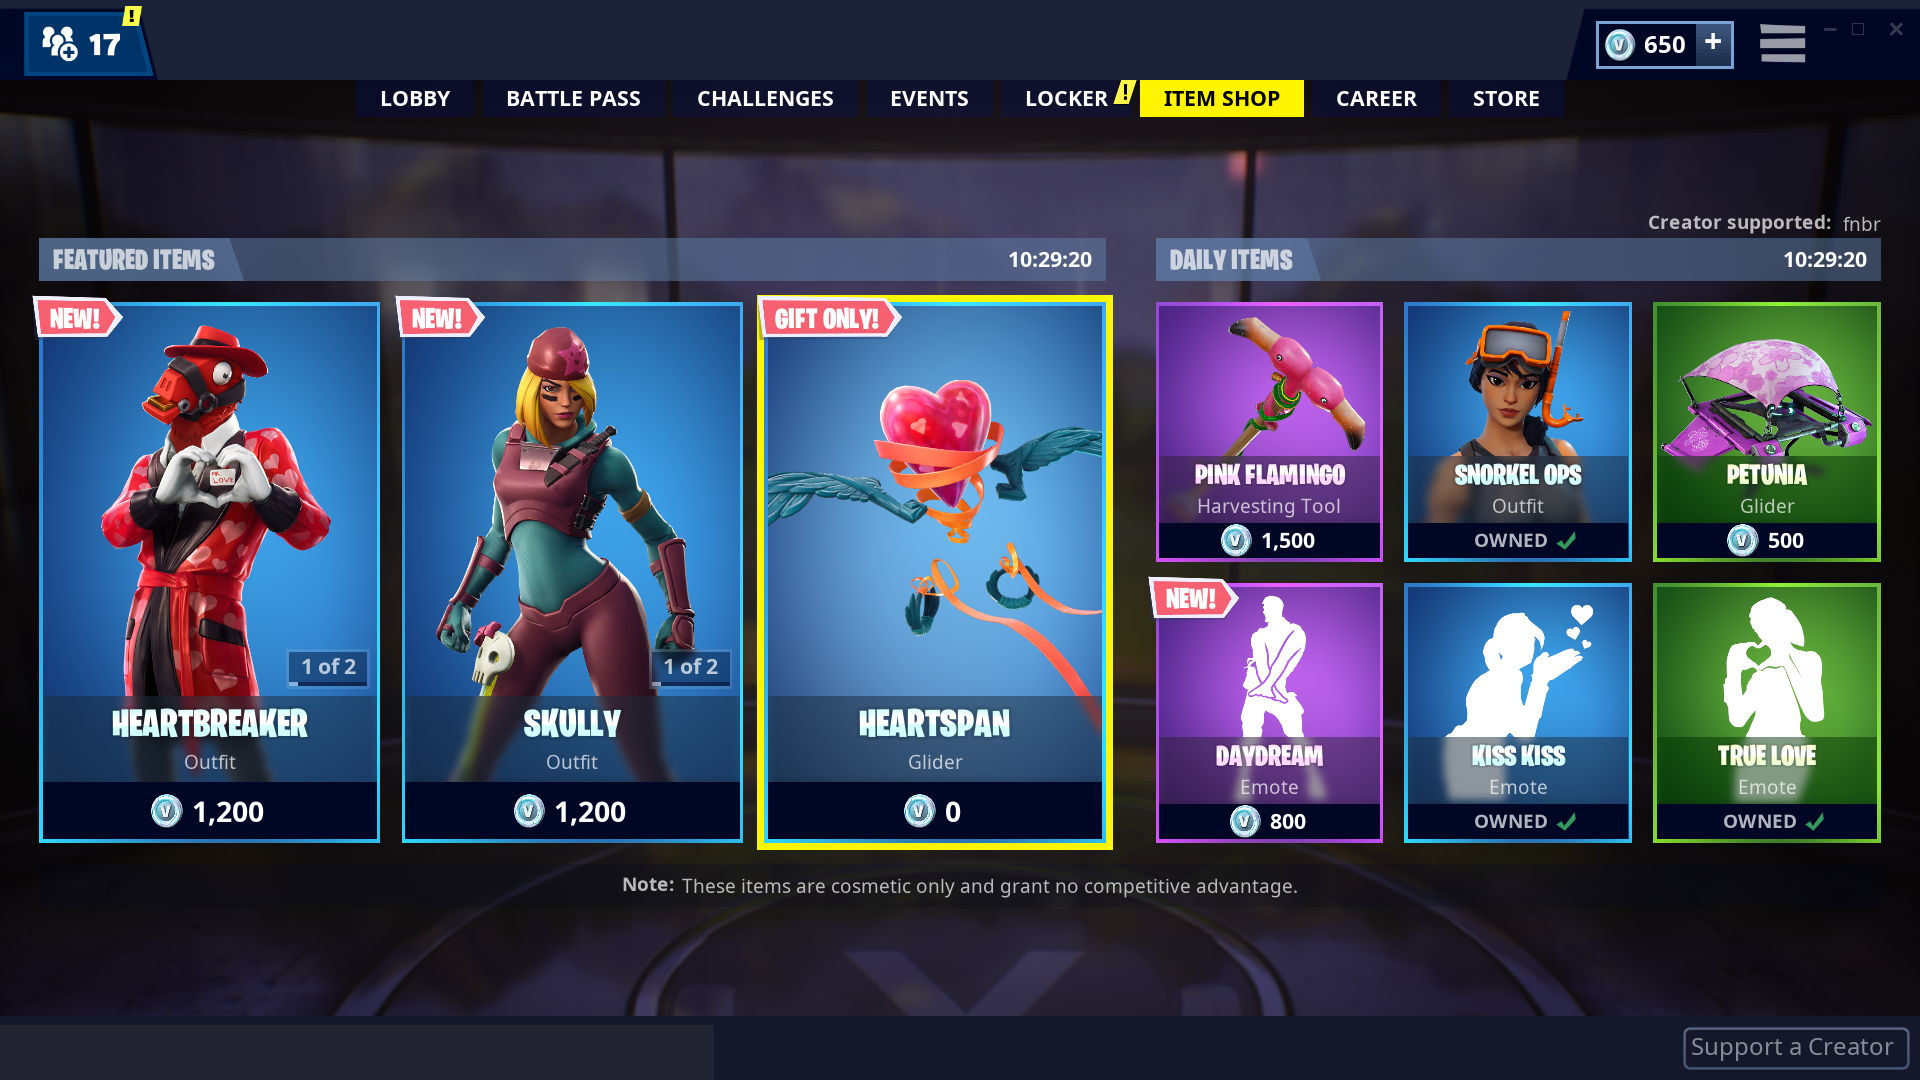 head to the item shop tab and select the heartspan panel - fortnite item shop codes